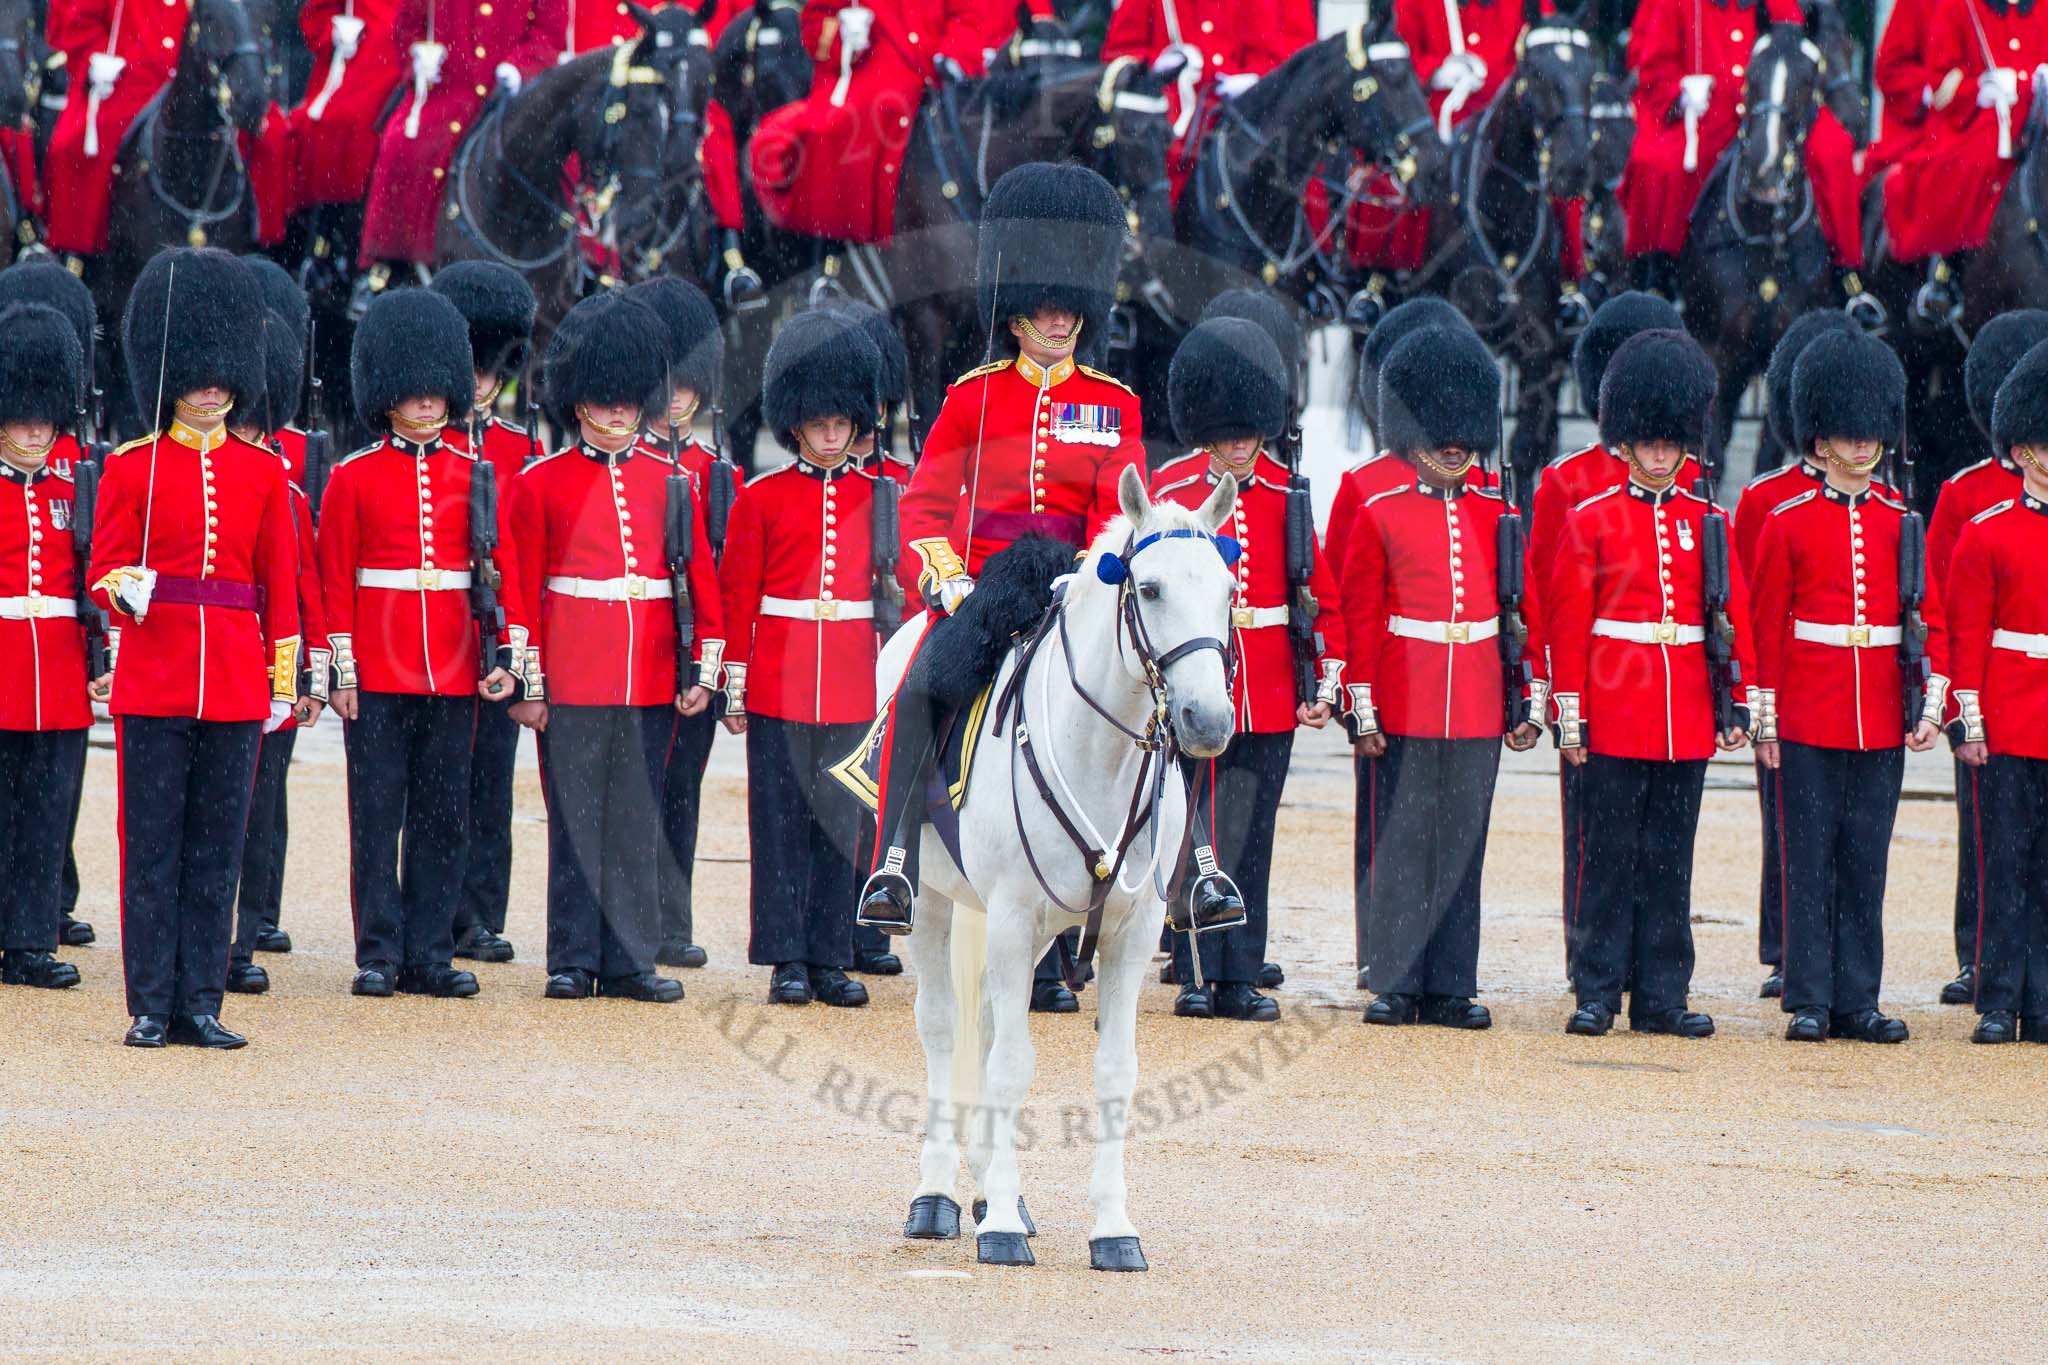 The Colonel's Review 2014.
Horse Guards Parade, Westminster,
London,

United Kingdom,
on 07 June 2014 at 11:18, image #379